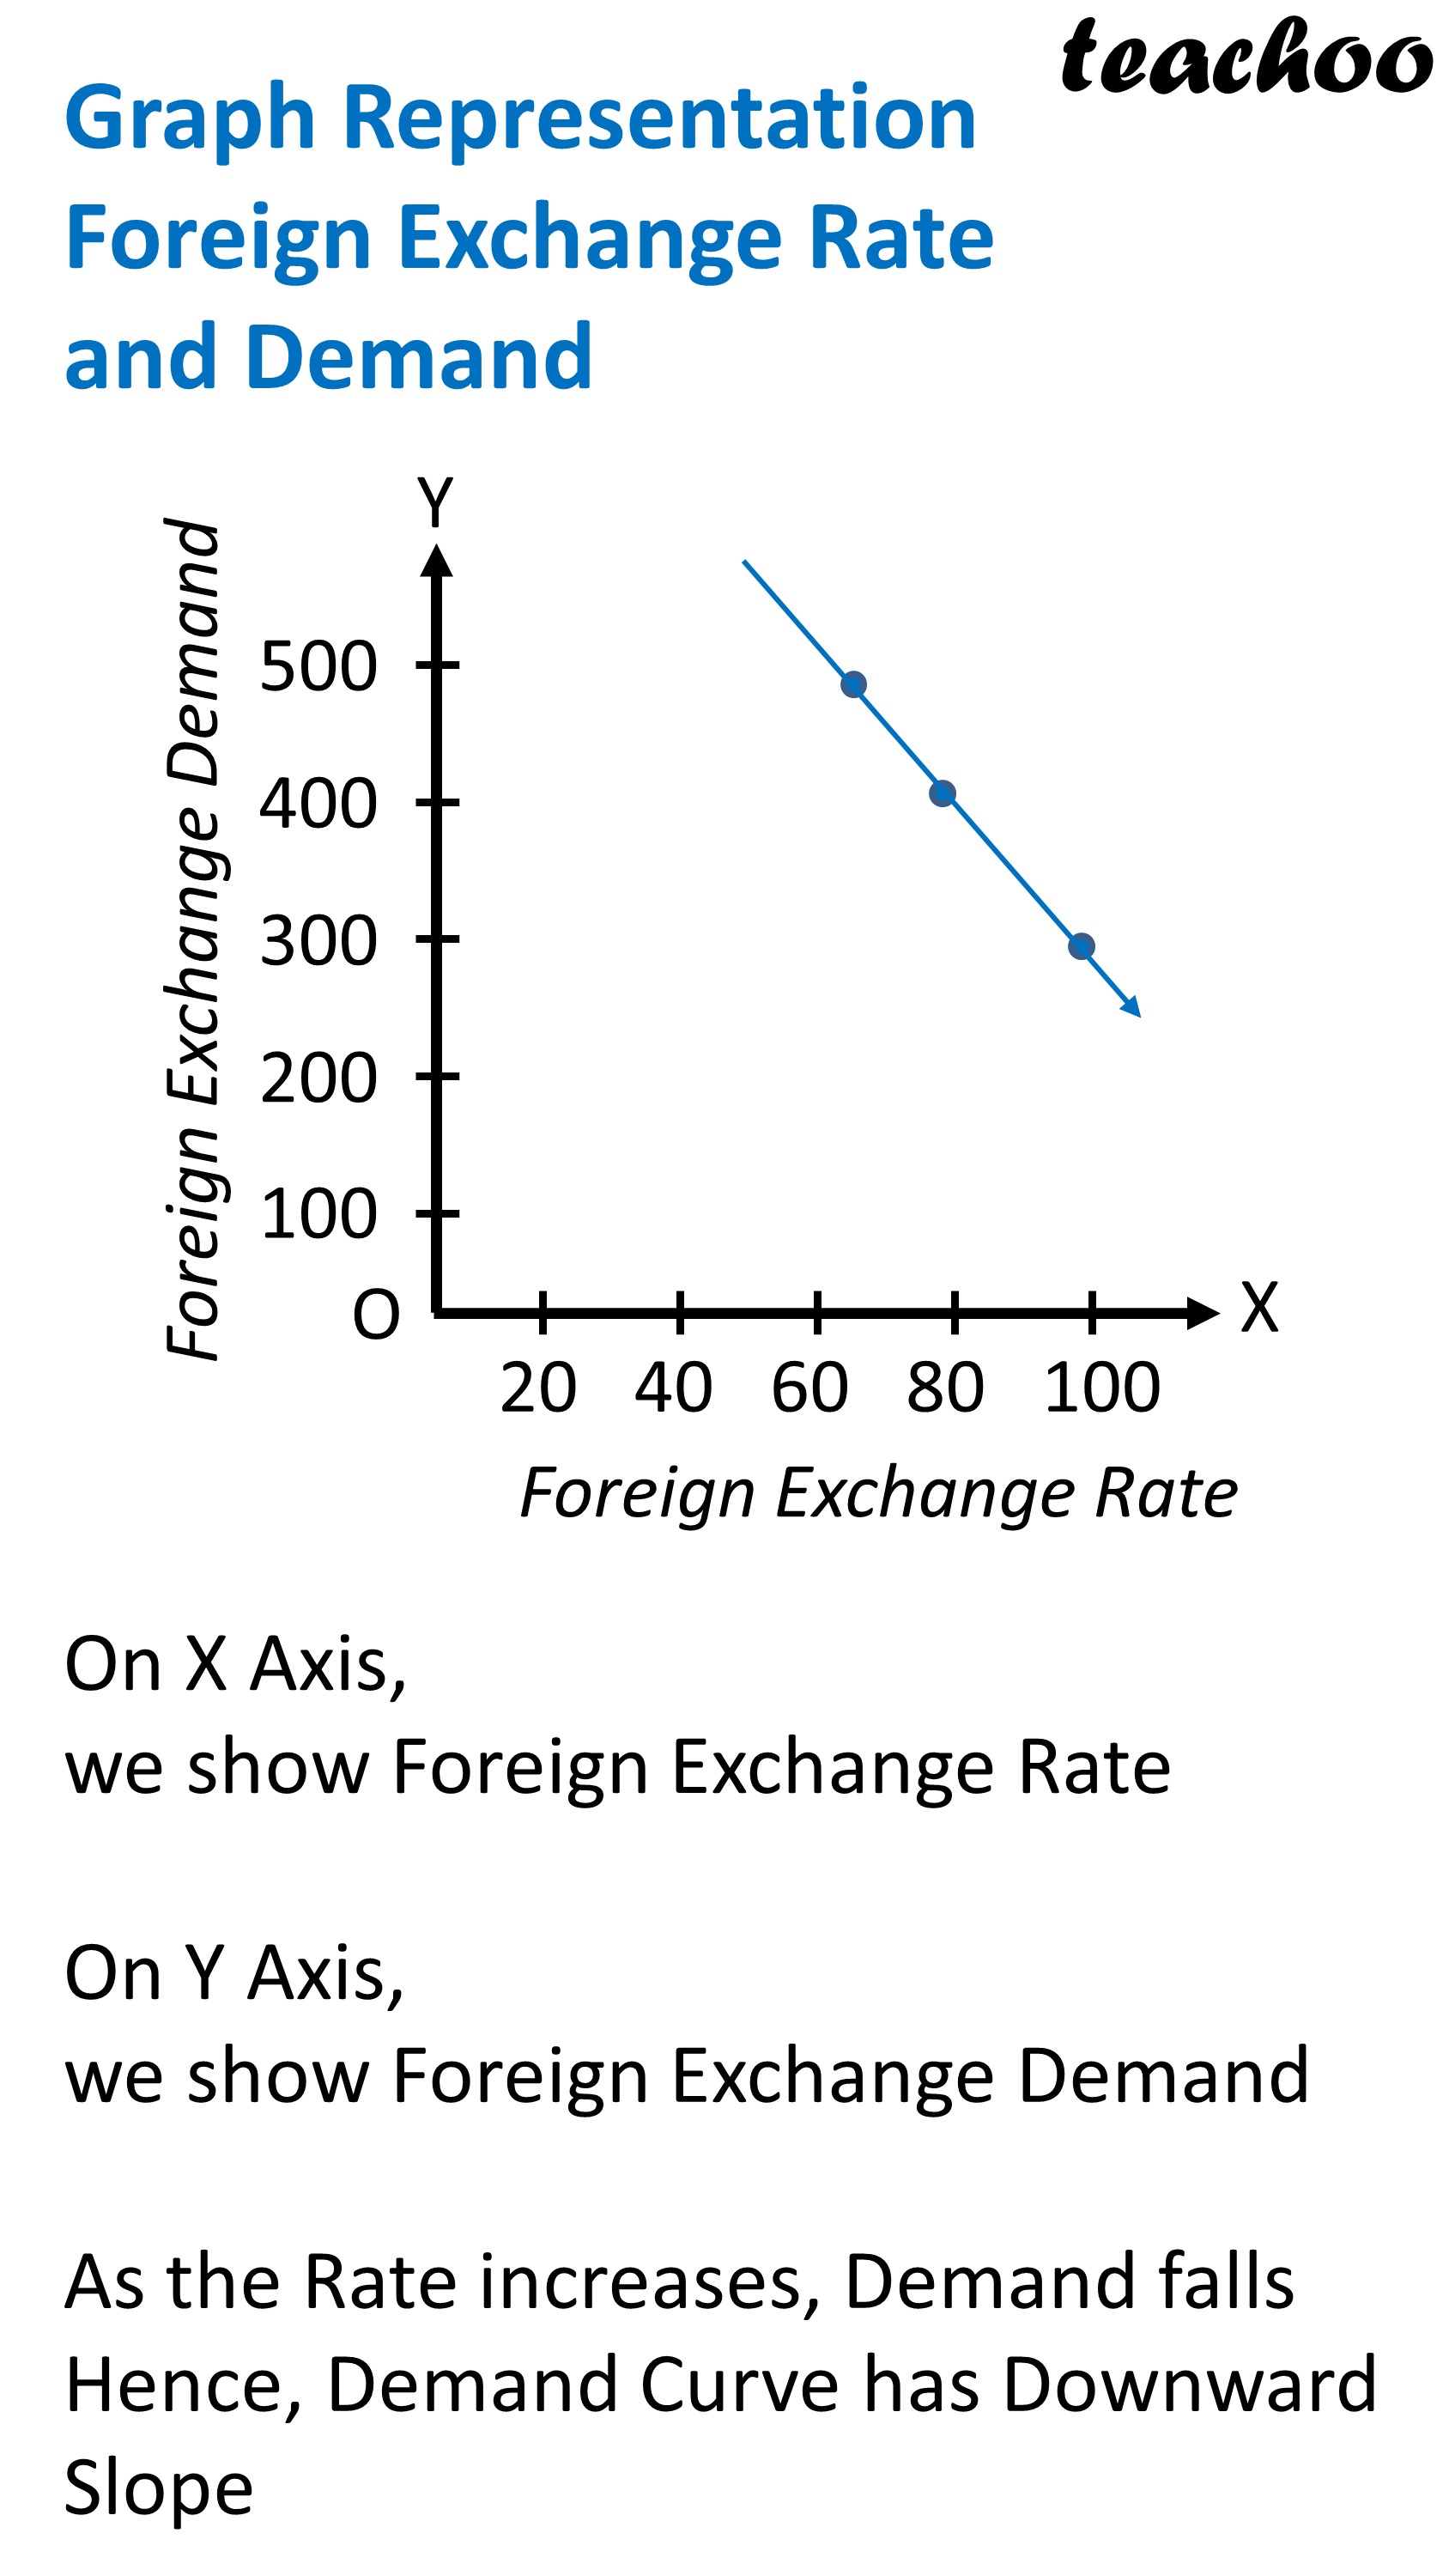 Graph Representation Foreign Exchange Rate and Demand - Teachoo.JPG